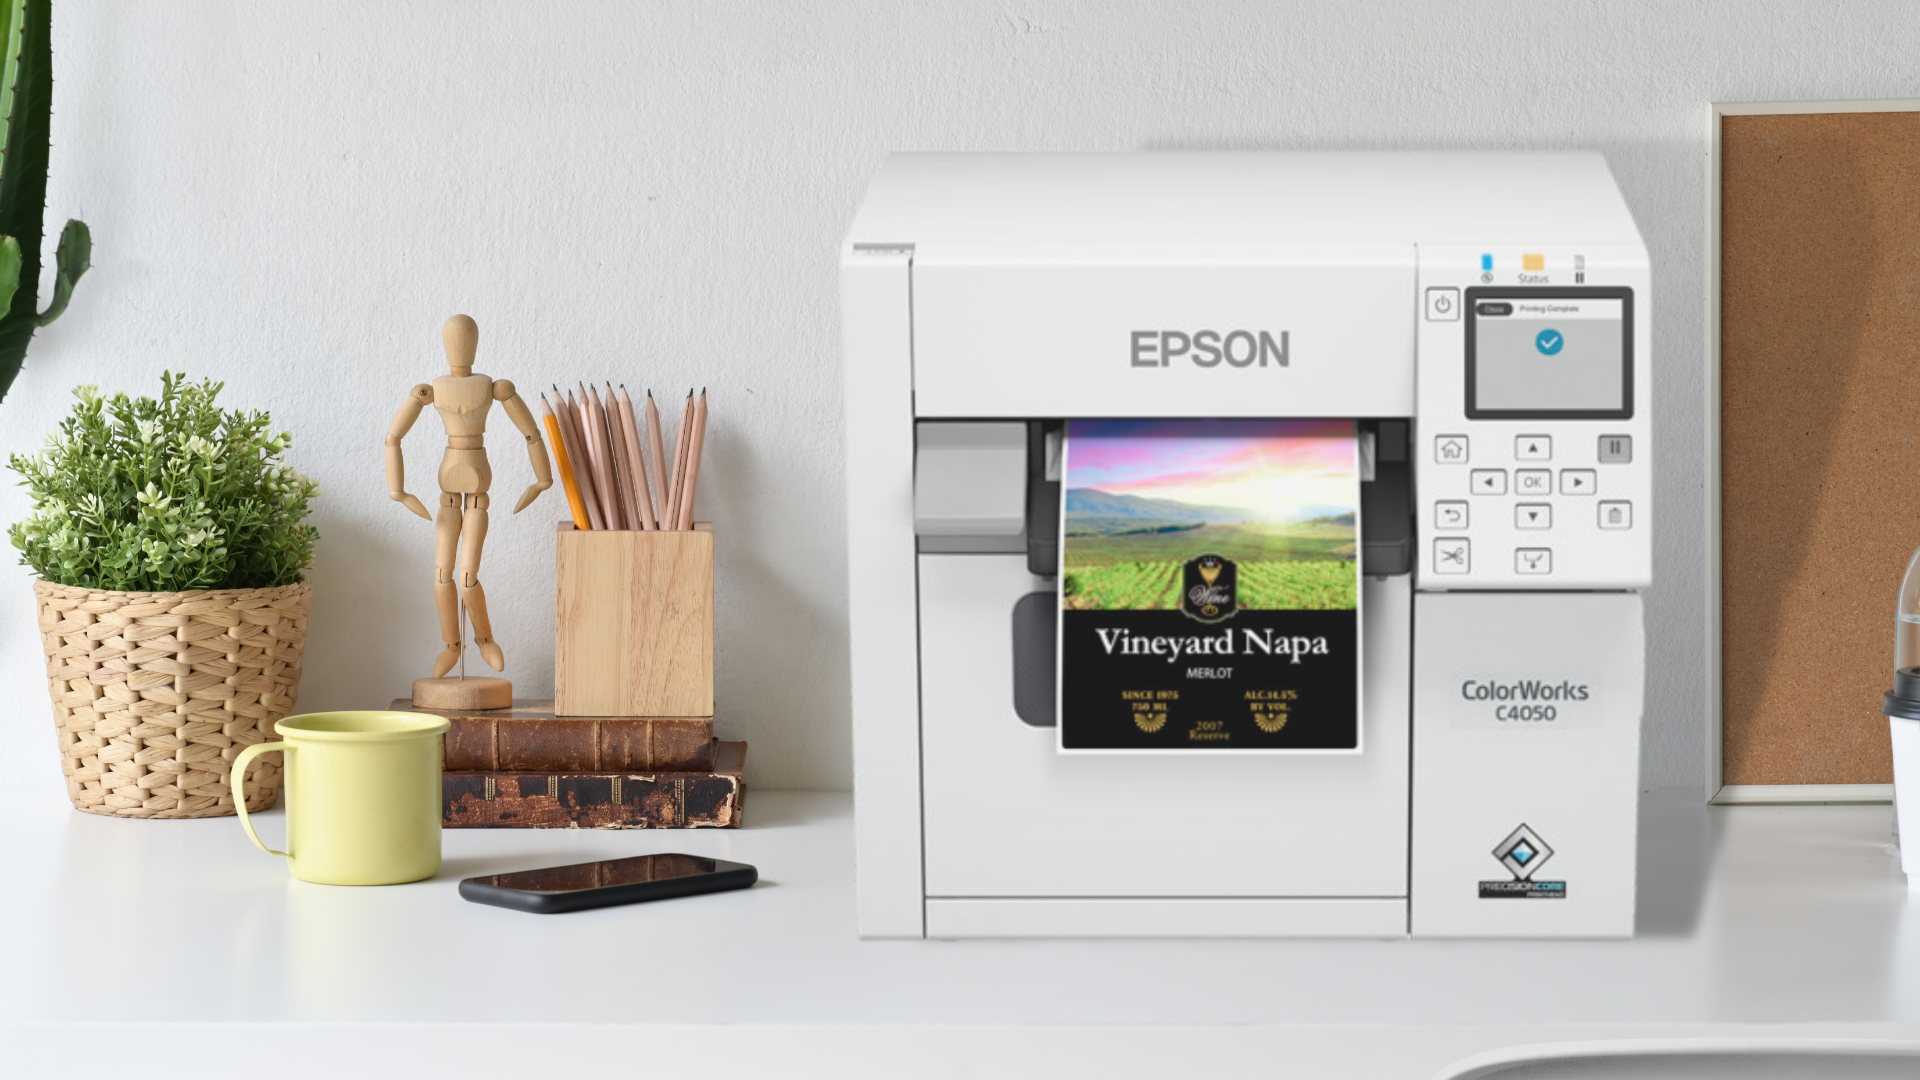 epson-colorworks-c4050---optional.png (1.79 MB)